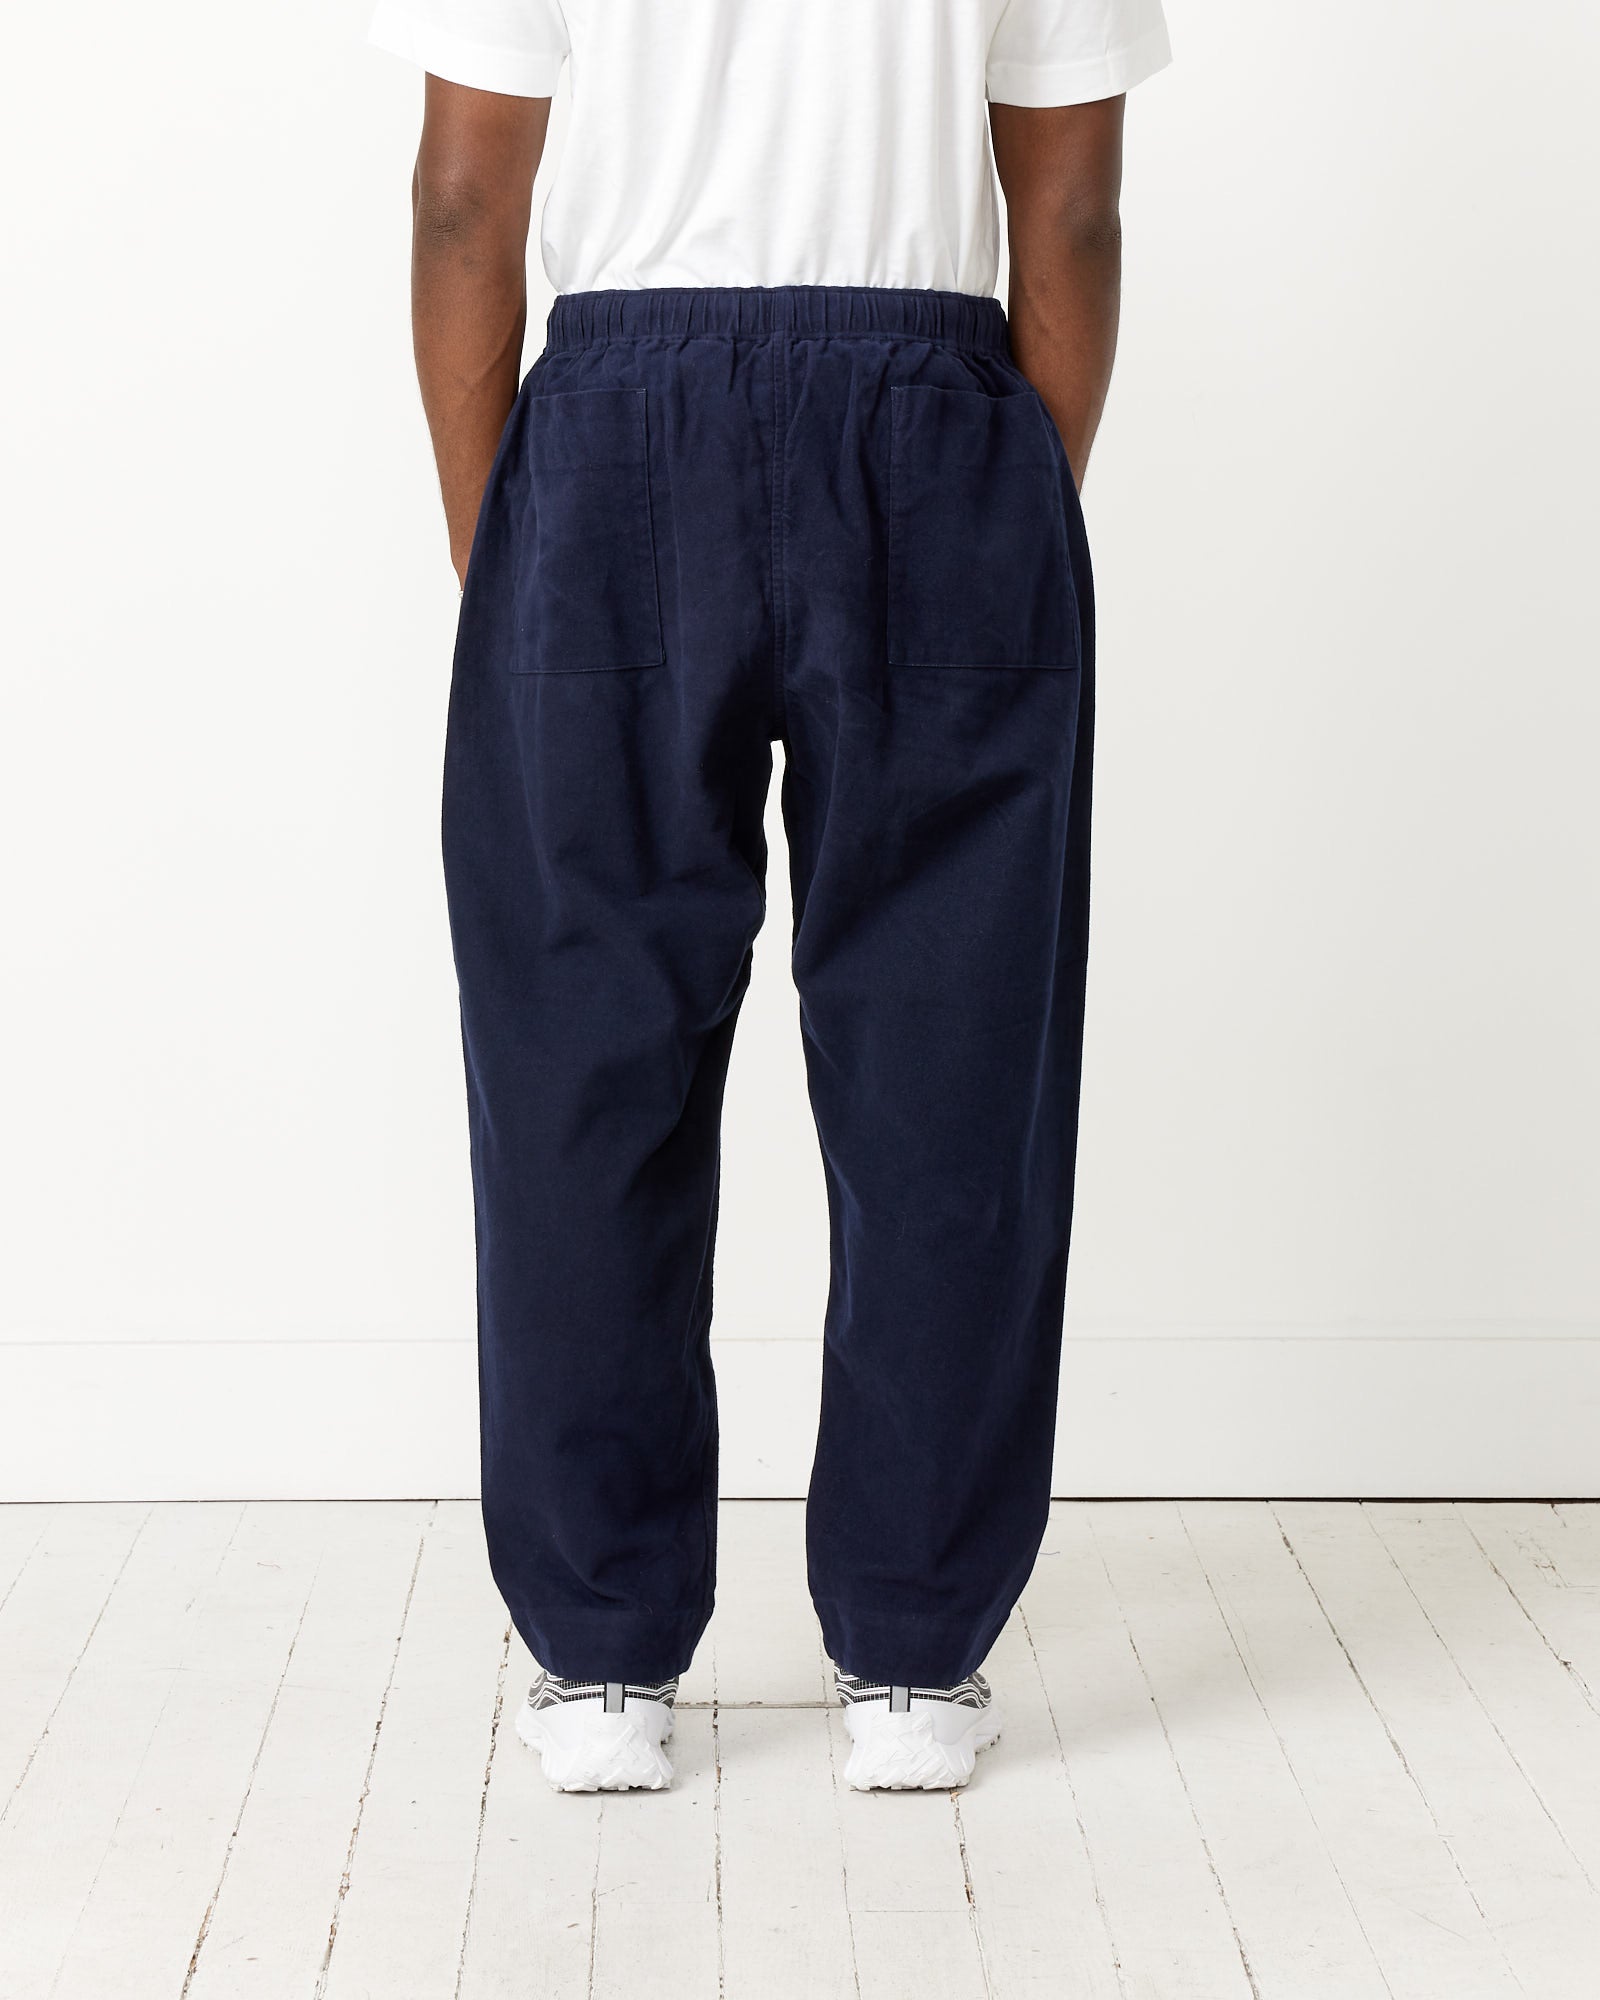 Flannel ODU Pant